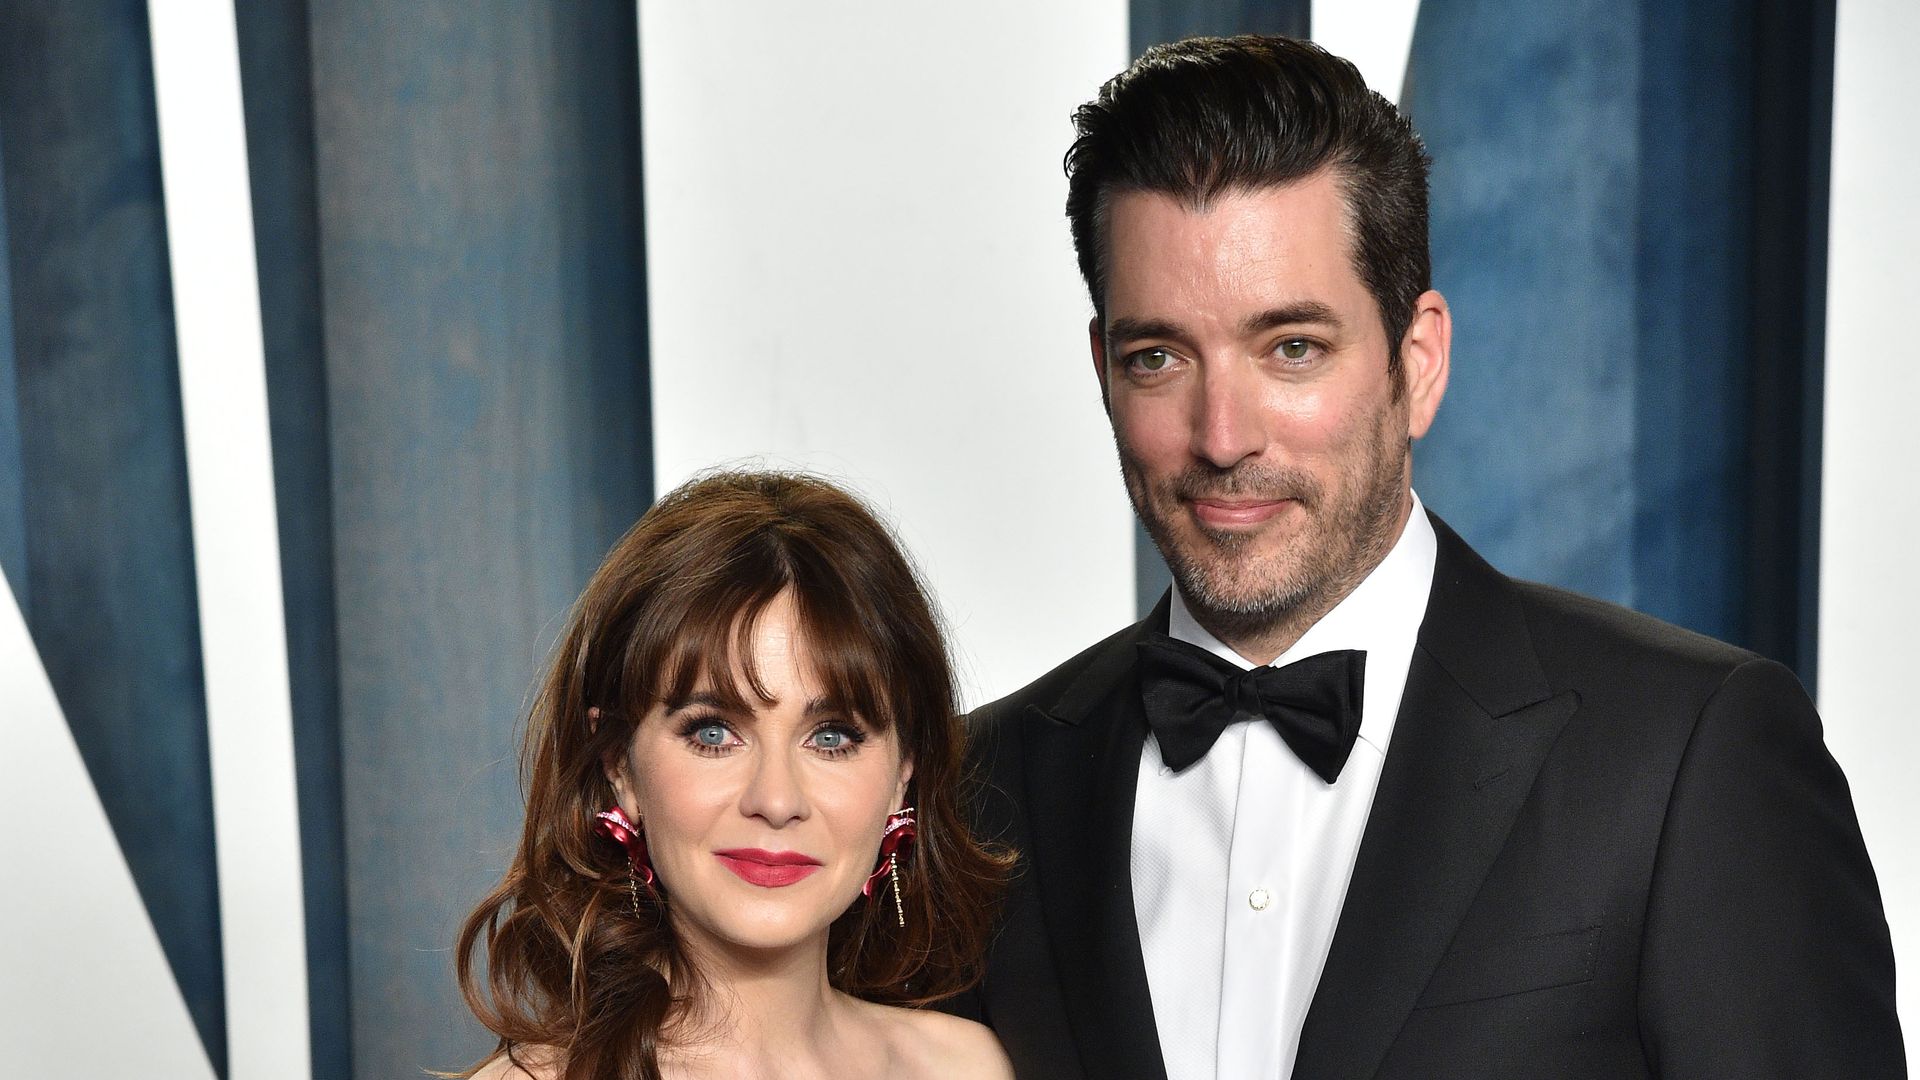 Zooey Deschanel and Jonathan Scott attend the 2022 Vanity Fair Oscar Party  on March 27, 2022 in Beverly Hills, California